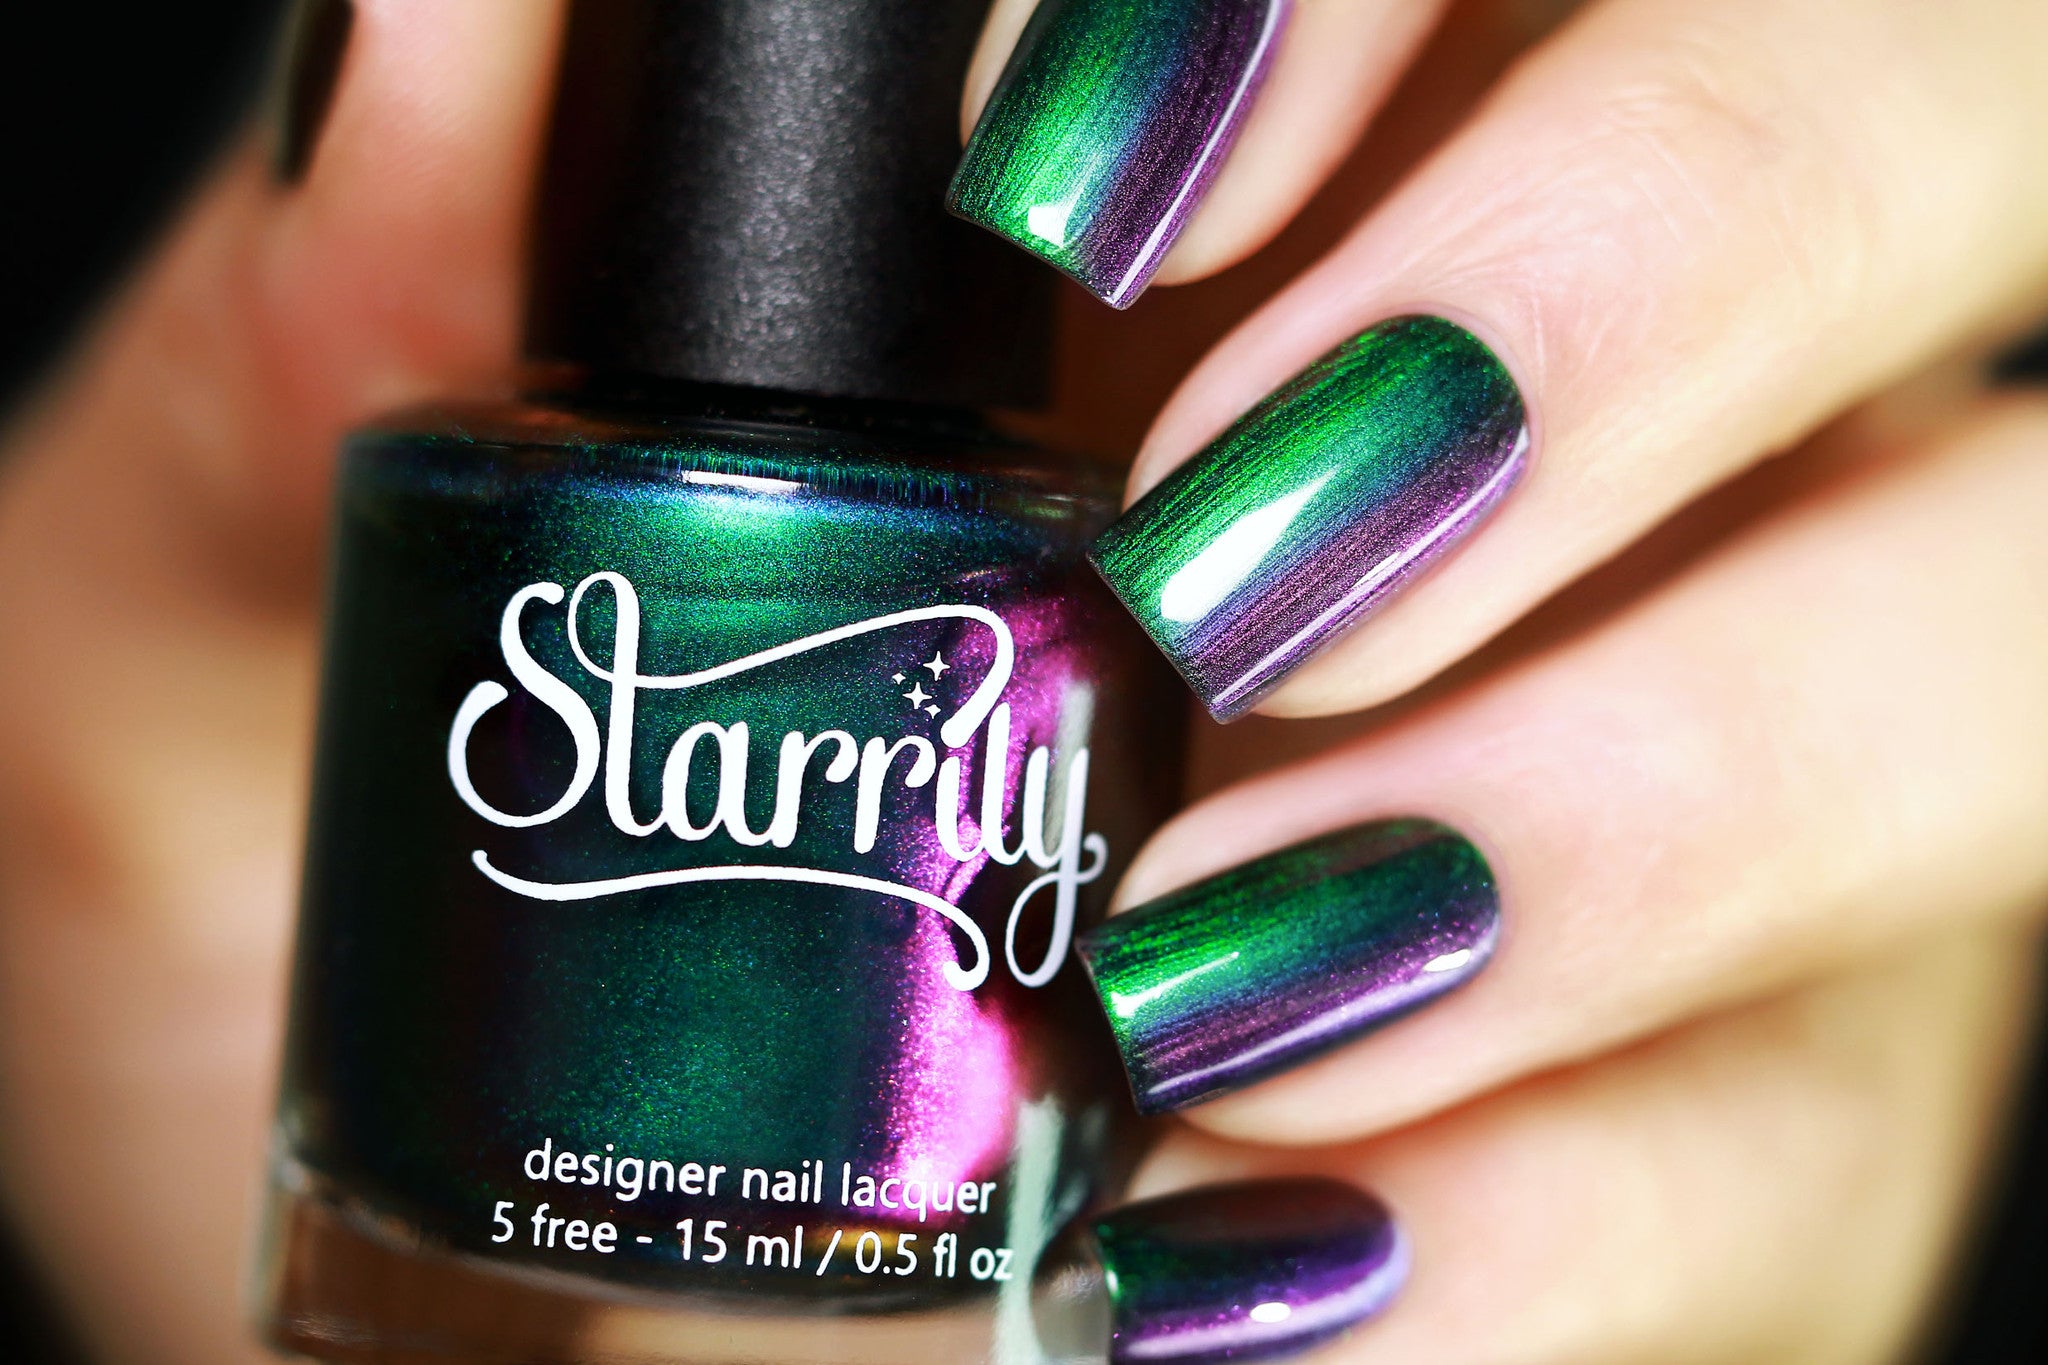 Death Wish is an amazing multichrome nail polish that changes from purple, green, gold and blue